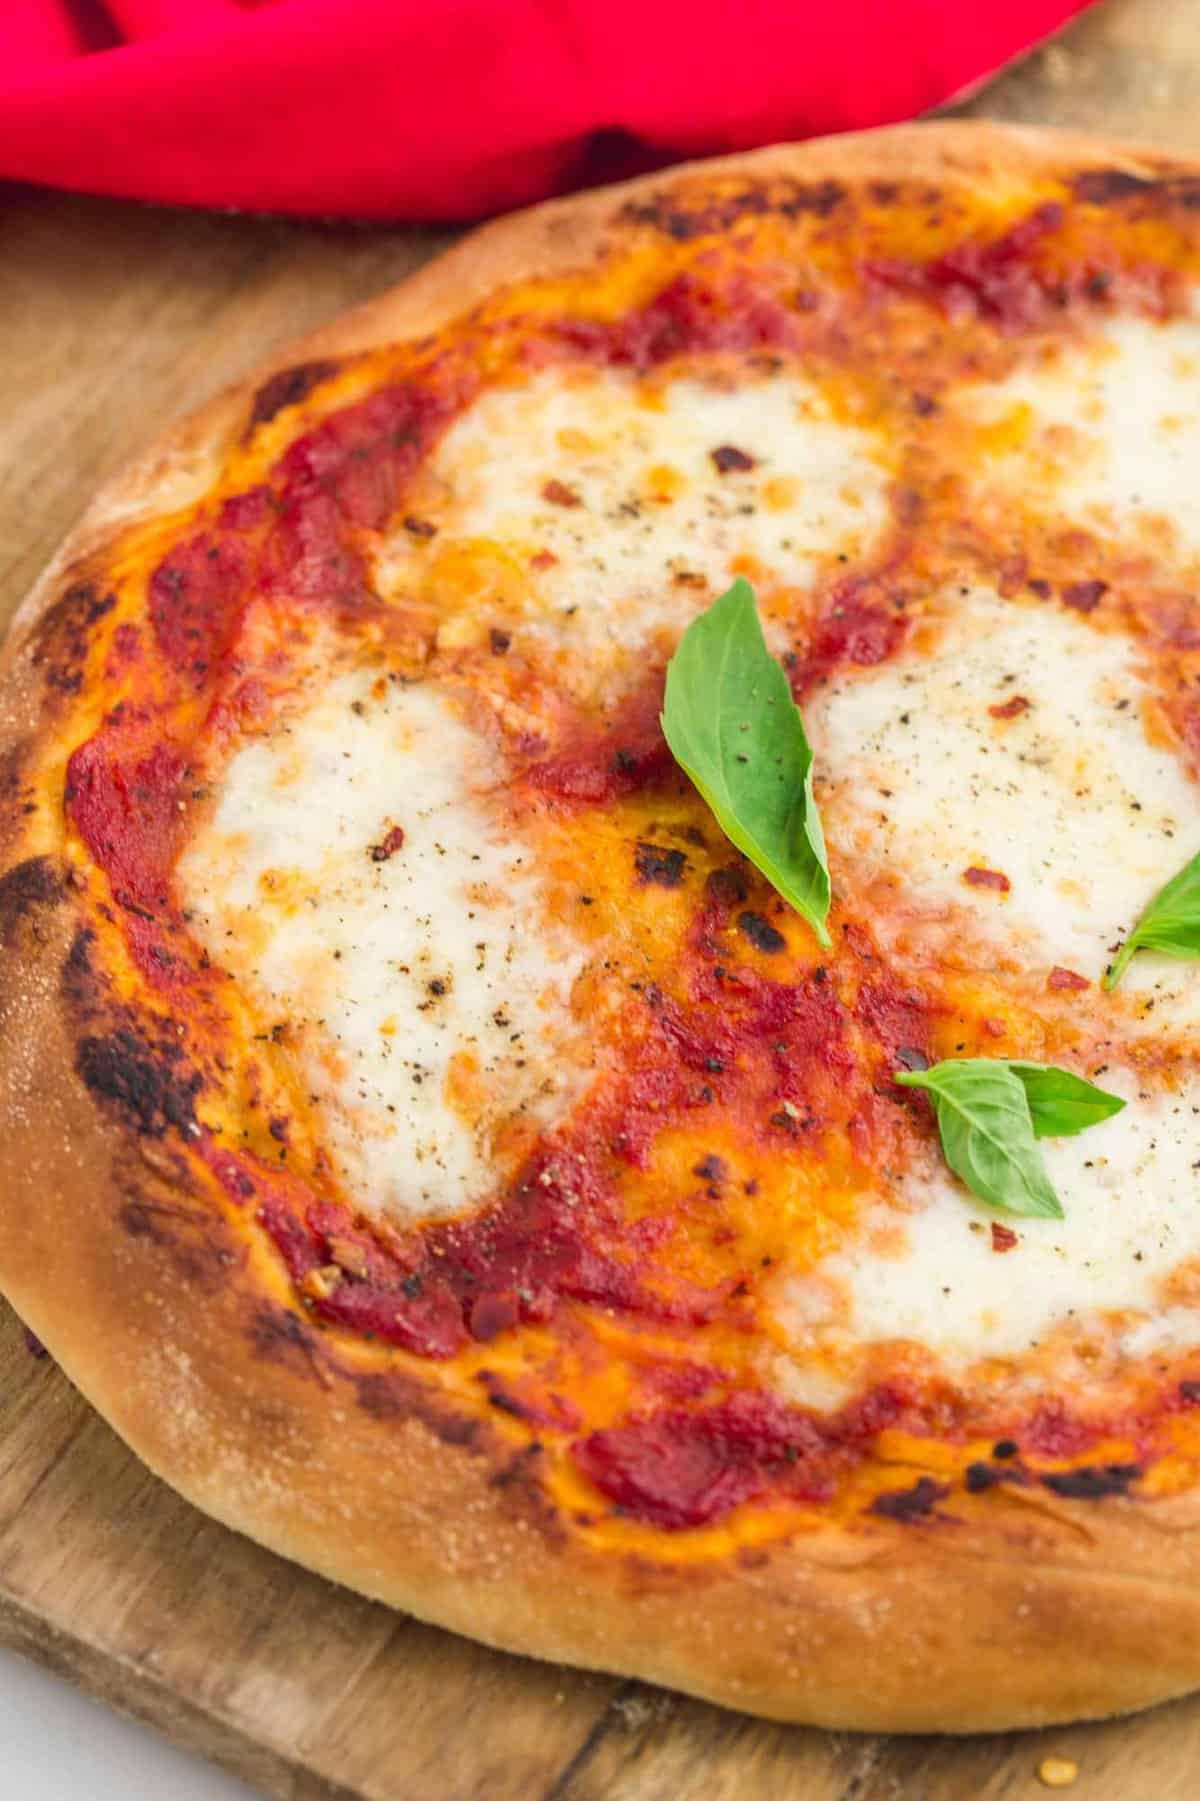  This dough is perfect for any pizza topping you desire.